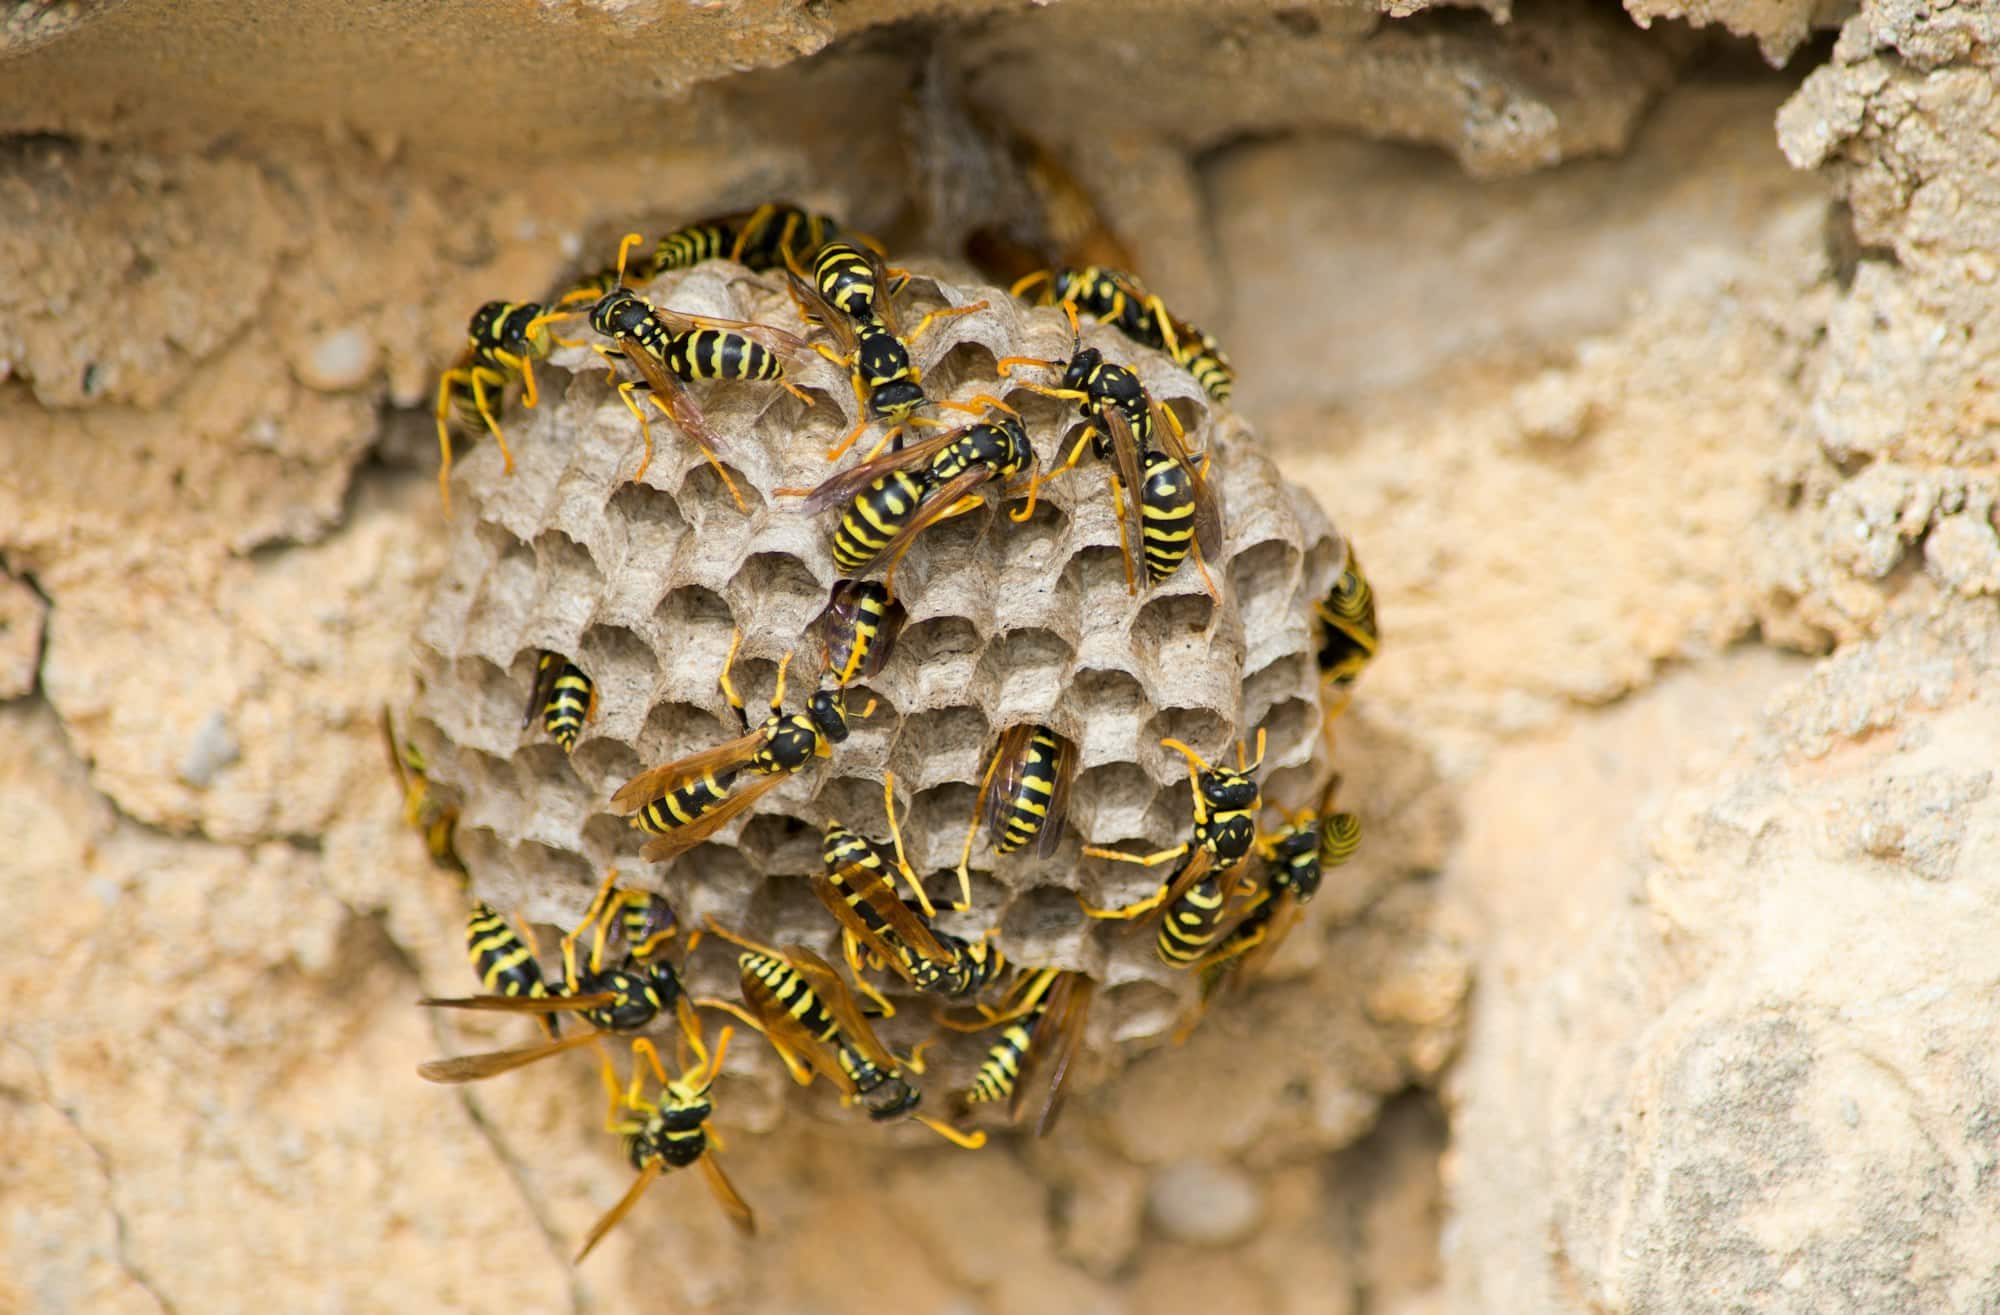 Closeup of bees on a large paper wasp nest under the sunlight in Malta